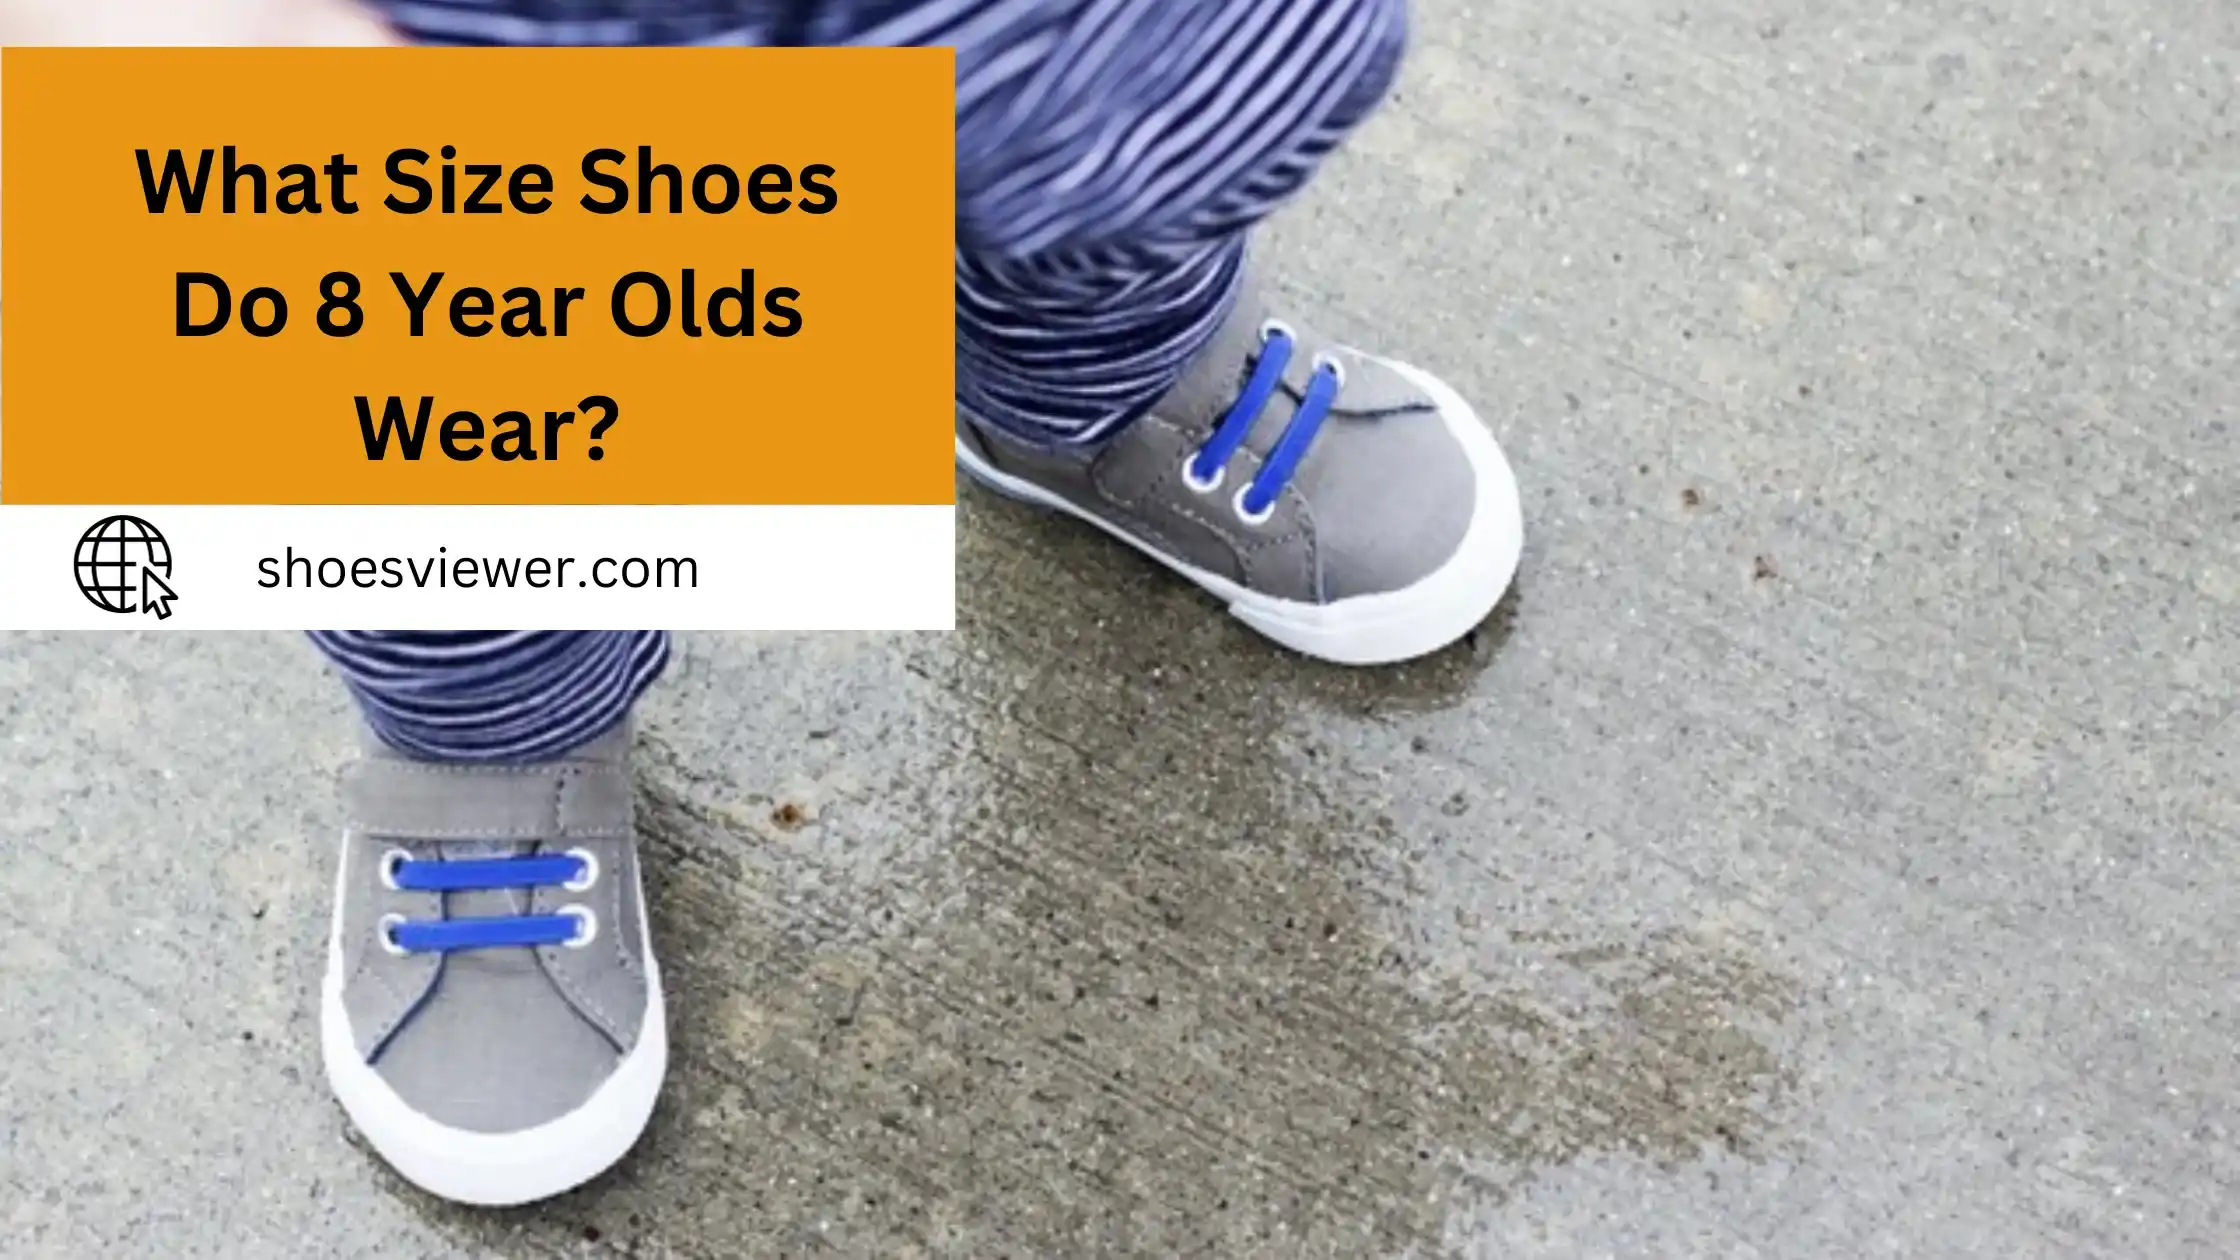 What Size Shoes Do 8 Year Olds Wear? Detailed Information